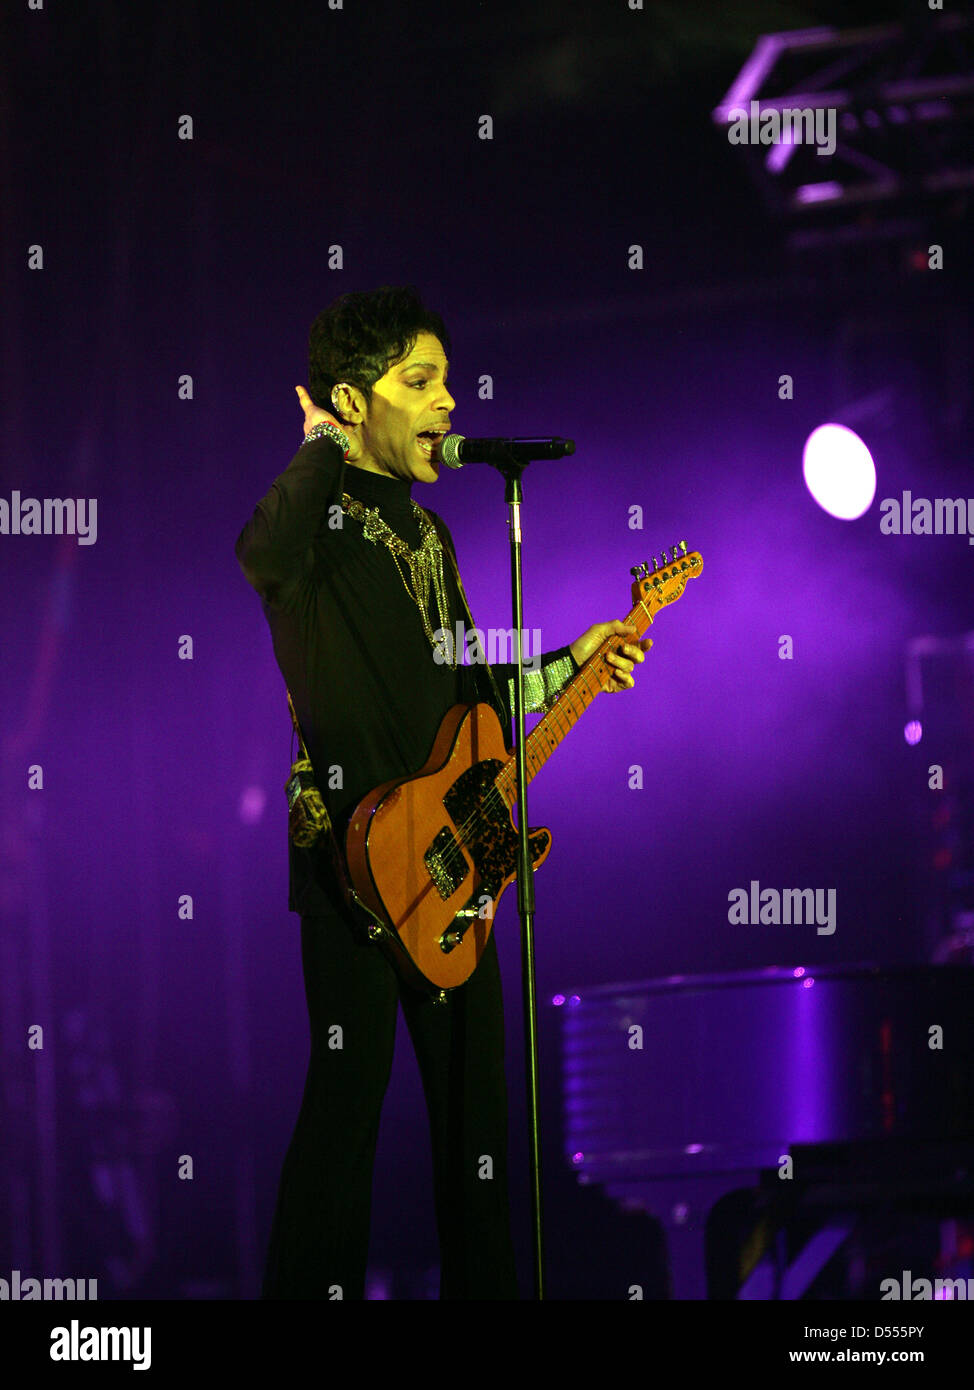 The rock/ pop/ funk musician Prince in concert at the annual Sziget Festival in Budapest, Hungary, on Tuesday, August 9, 2011. Stock Photo